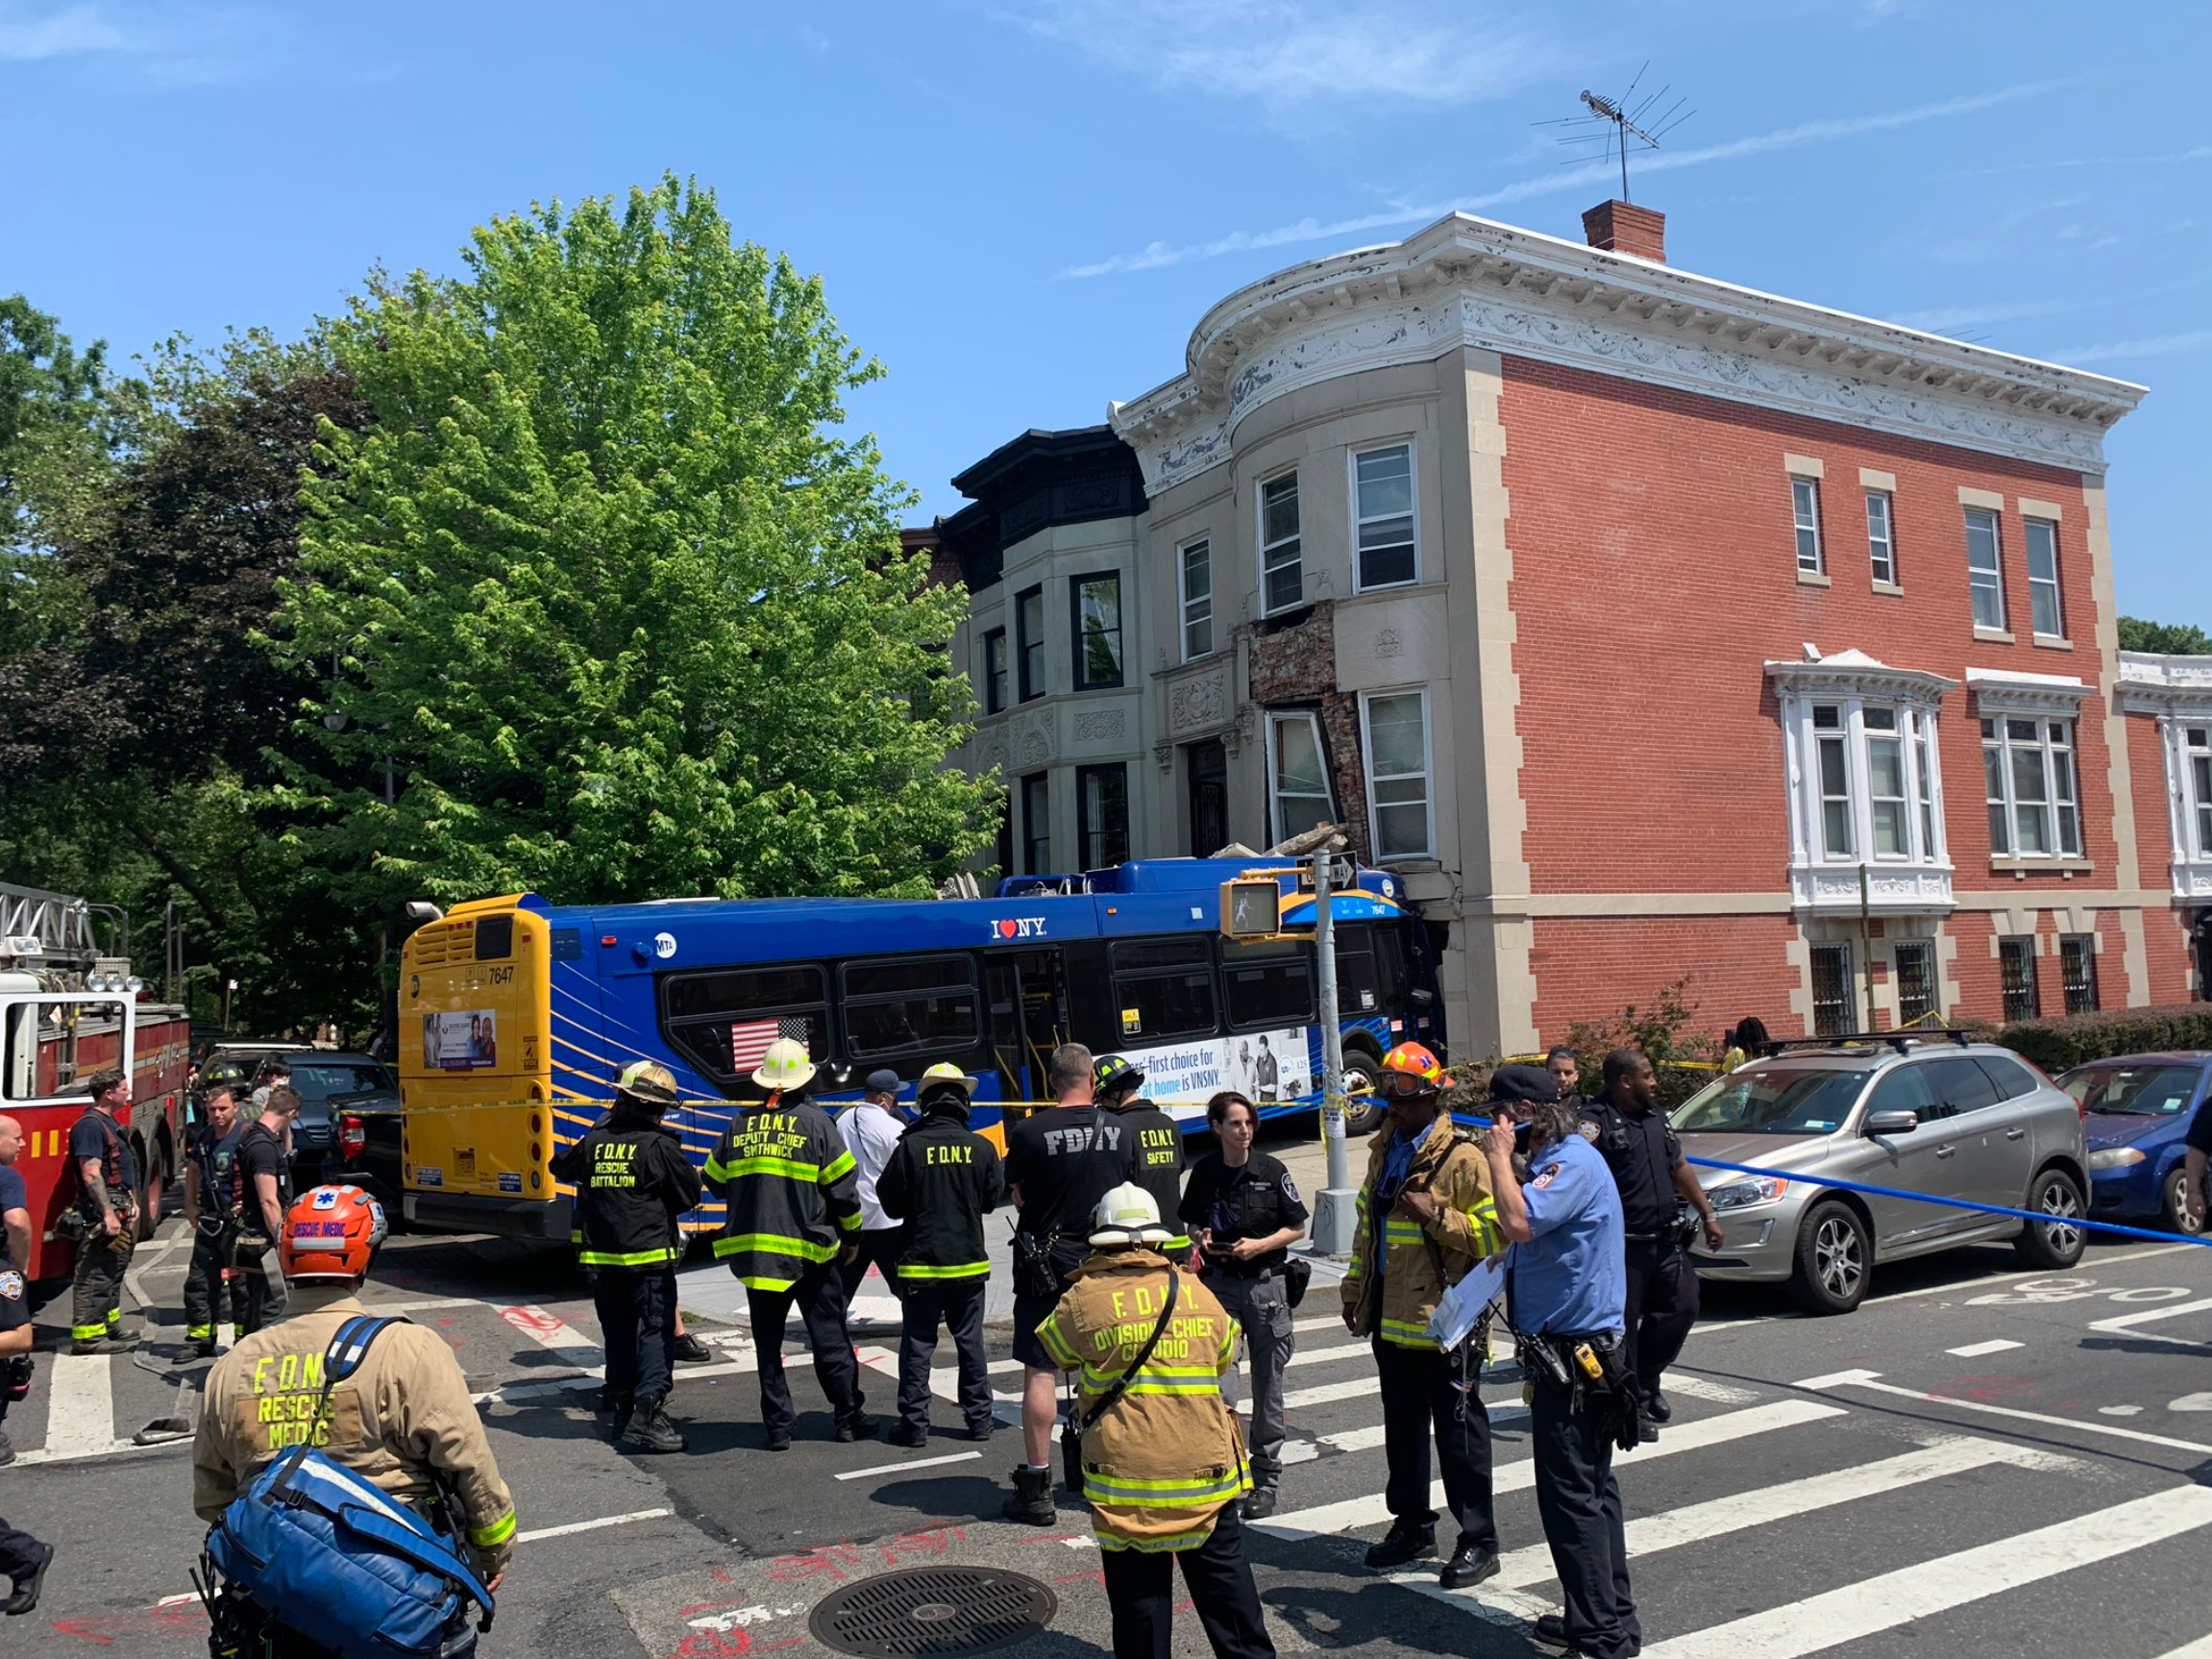 An MTA bus crashed into a residential building in Brooklyn, New York City